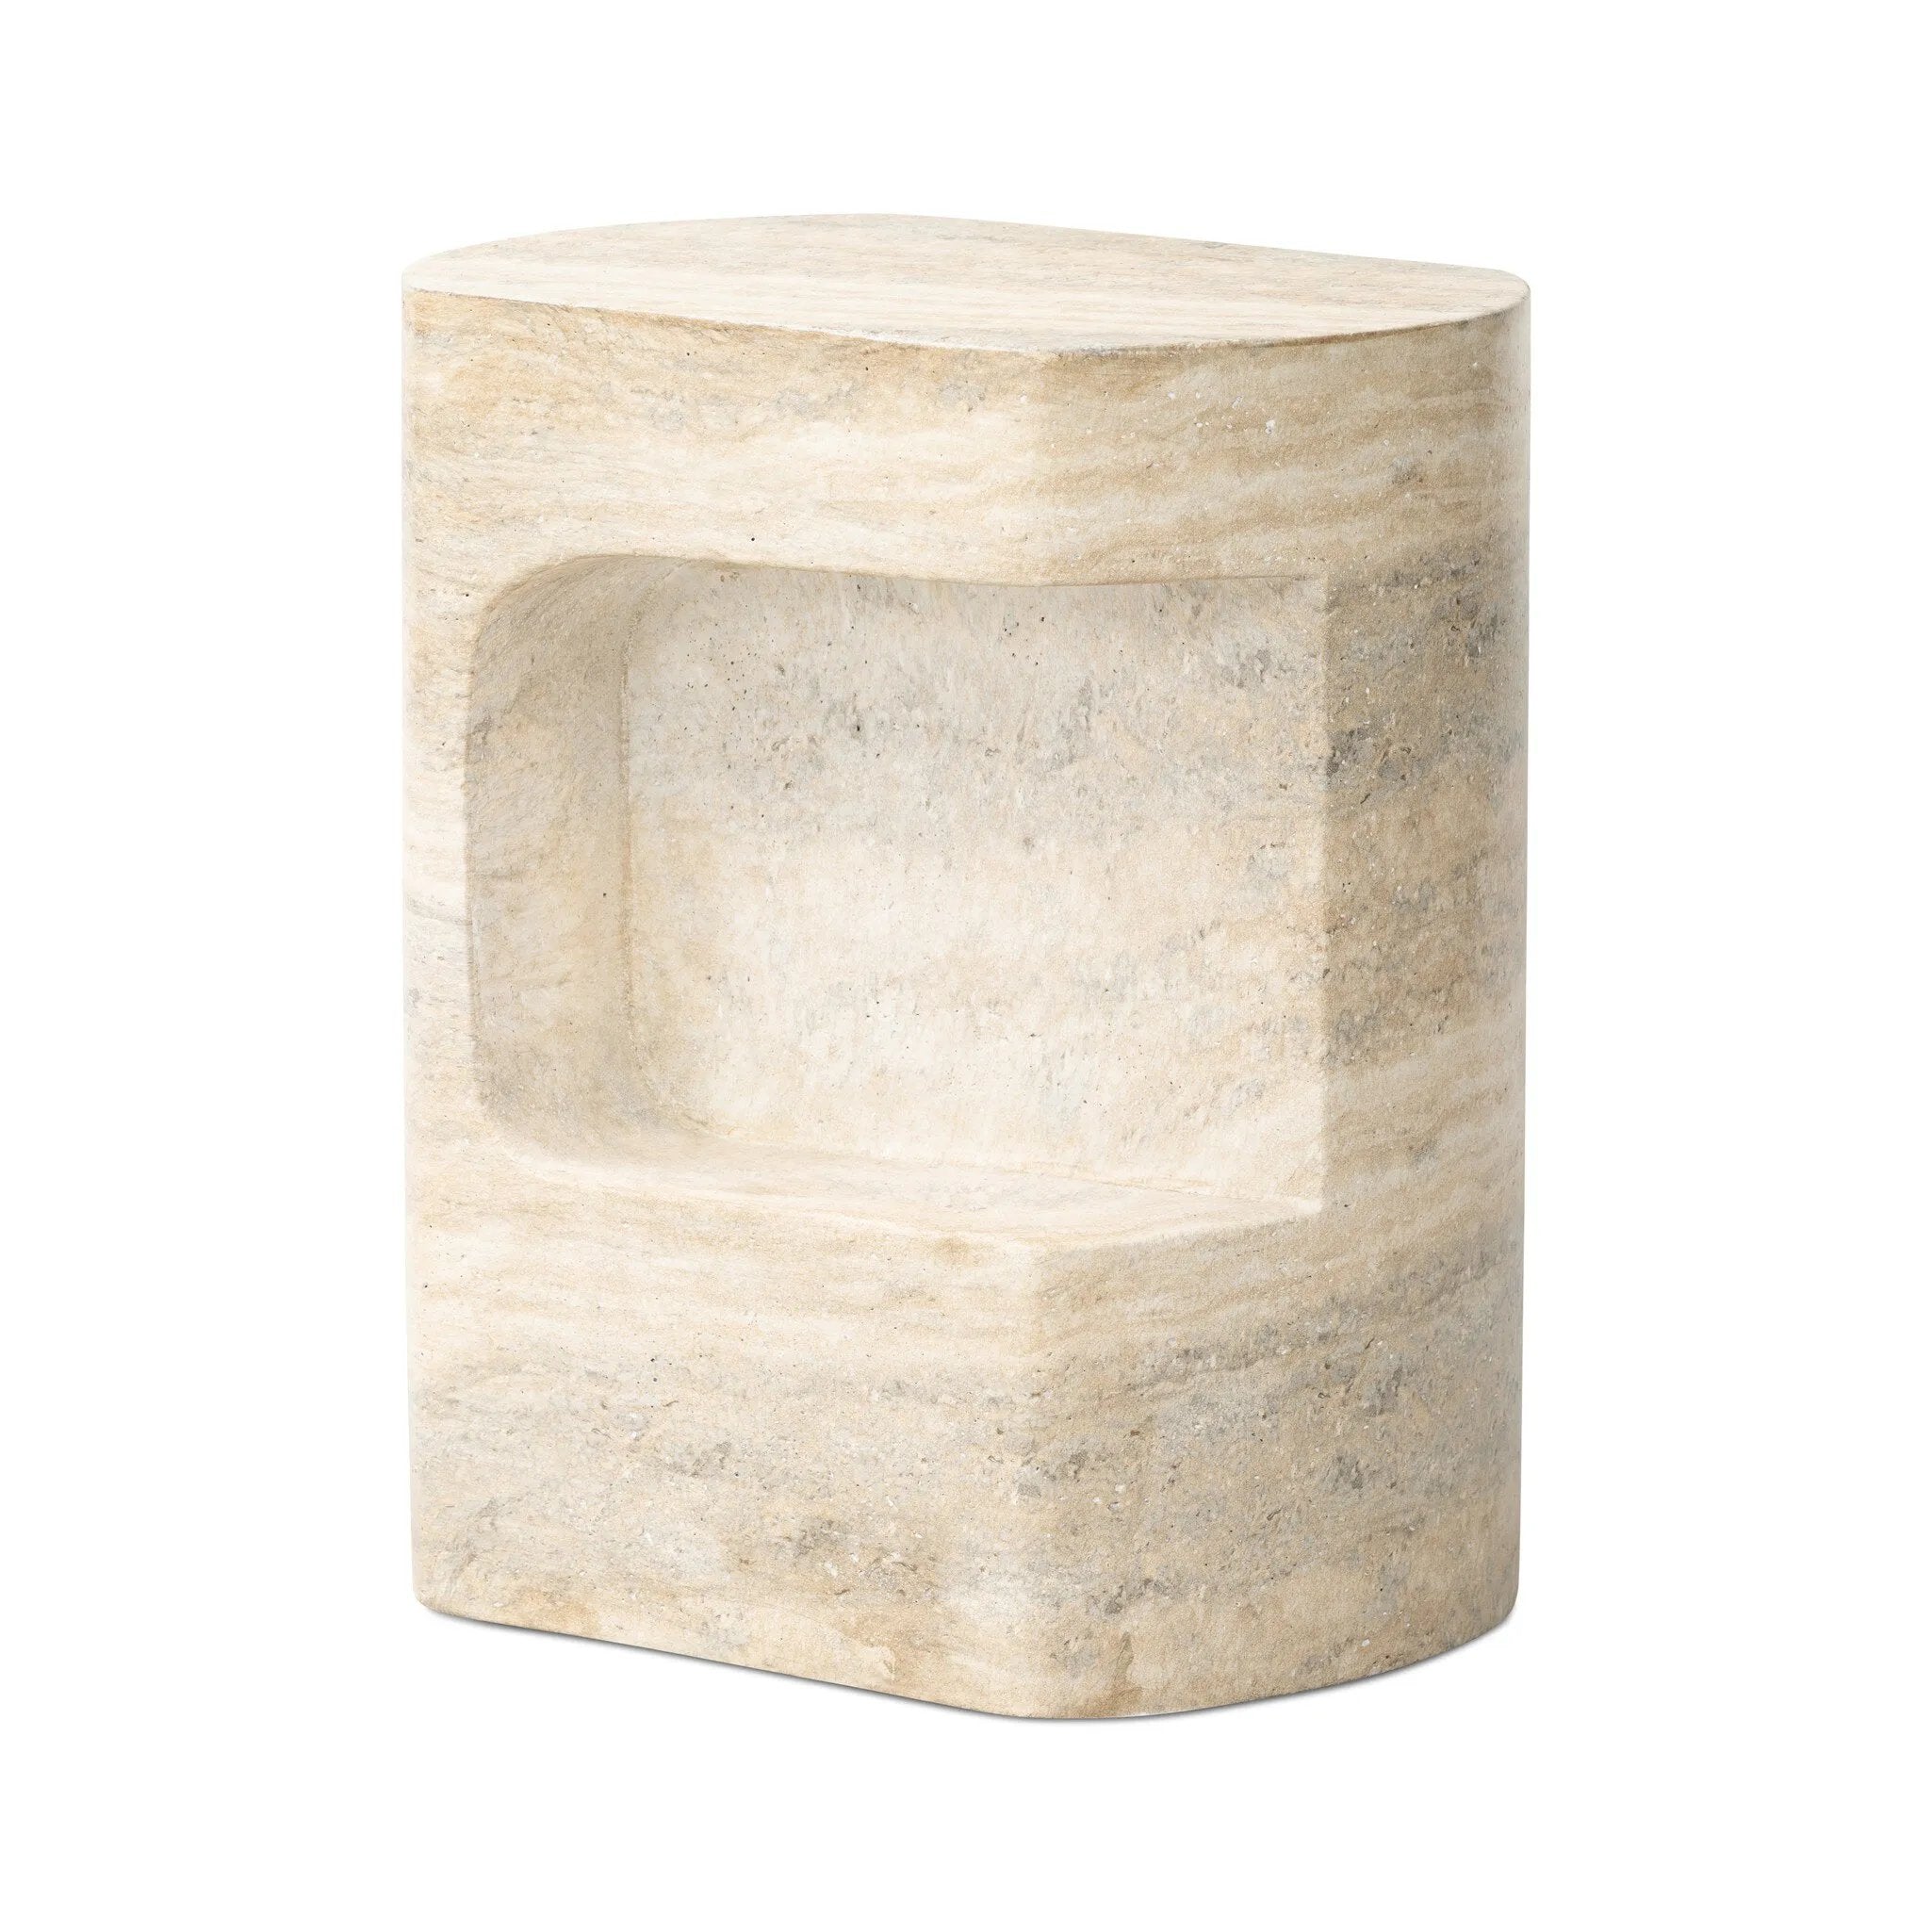 Cutout detailing brings a clean, modern vibe to a versatile end table of cast concrete. A water transfer finish creates a textured look and sandy hue resembling natural travertine.Collection: Chandle Amethyst Home provides interior design, new home construction design consulting, vintage area rugs, and lighting in the Kansas City metro area.